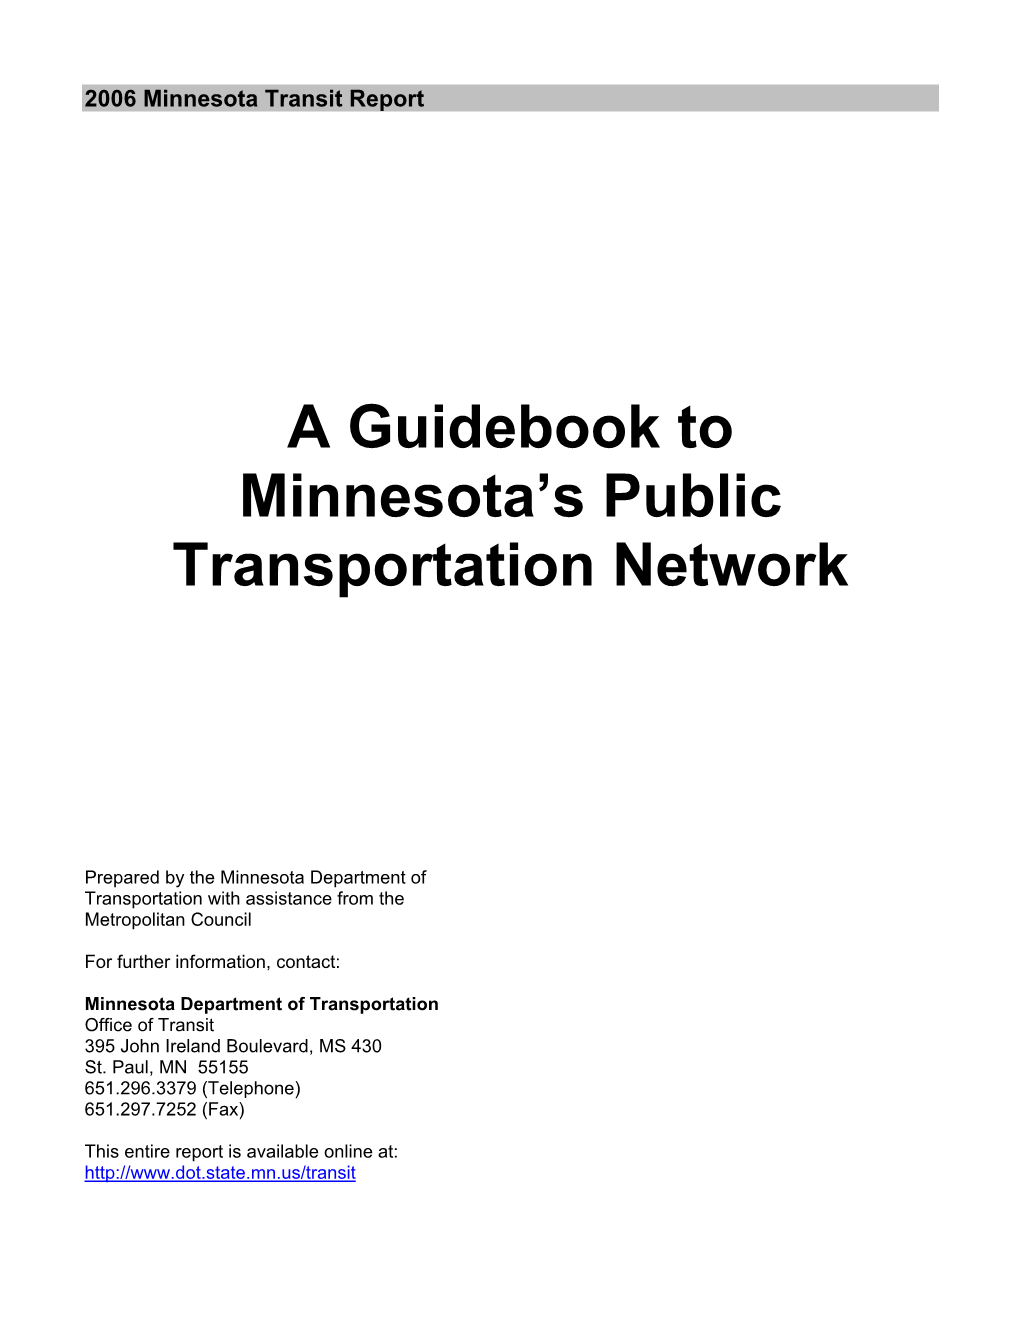 A Guidebook to Minnesota's Public Transportation Network